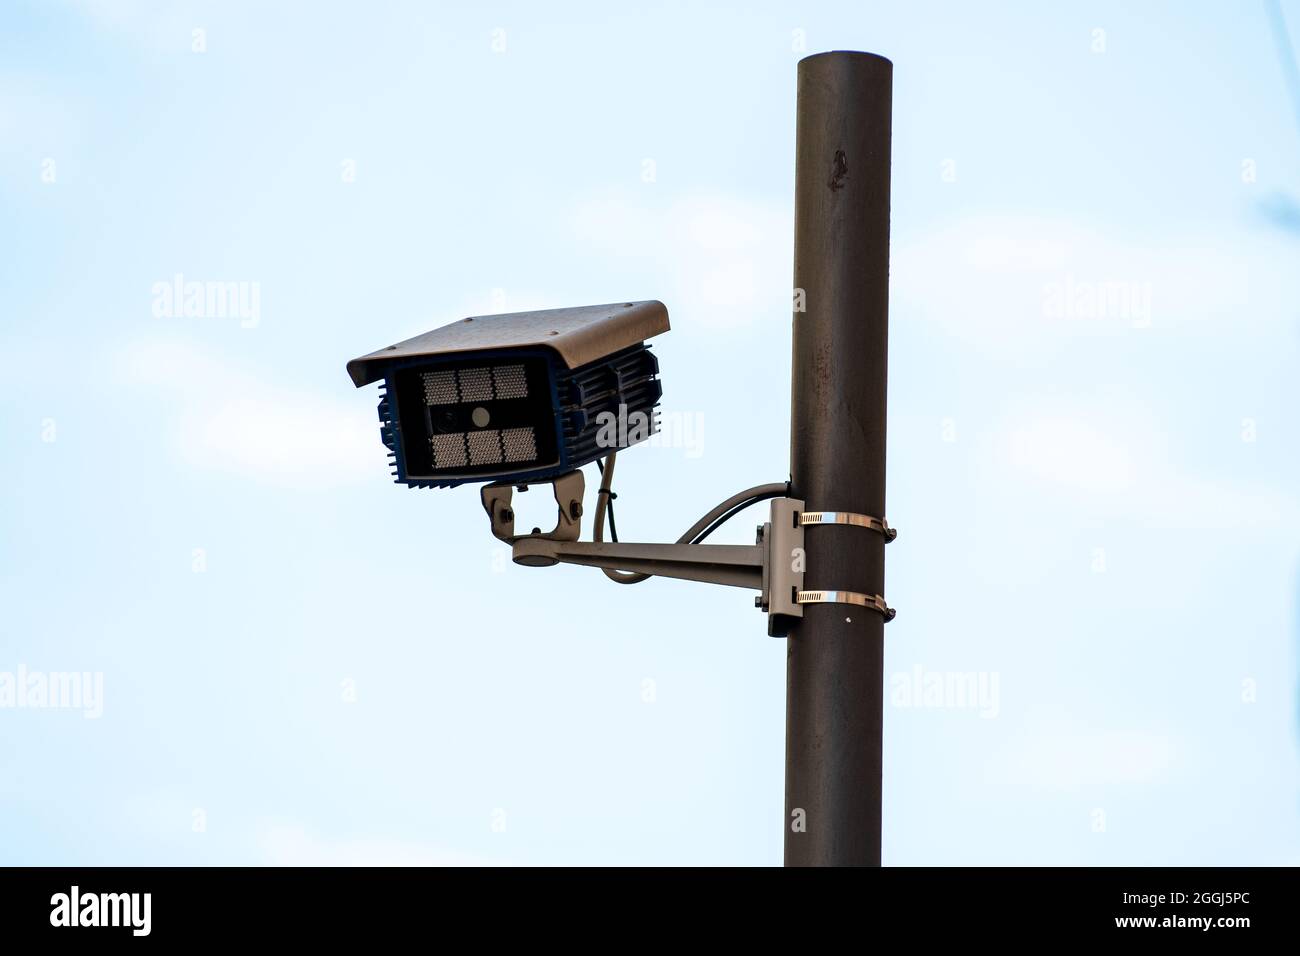 surveillance cameras inside the city for traffic control Stock Photo